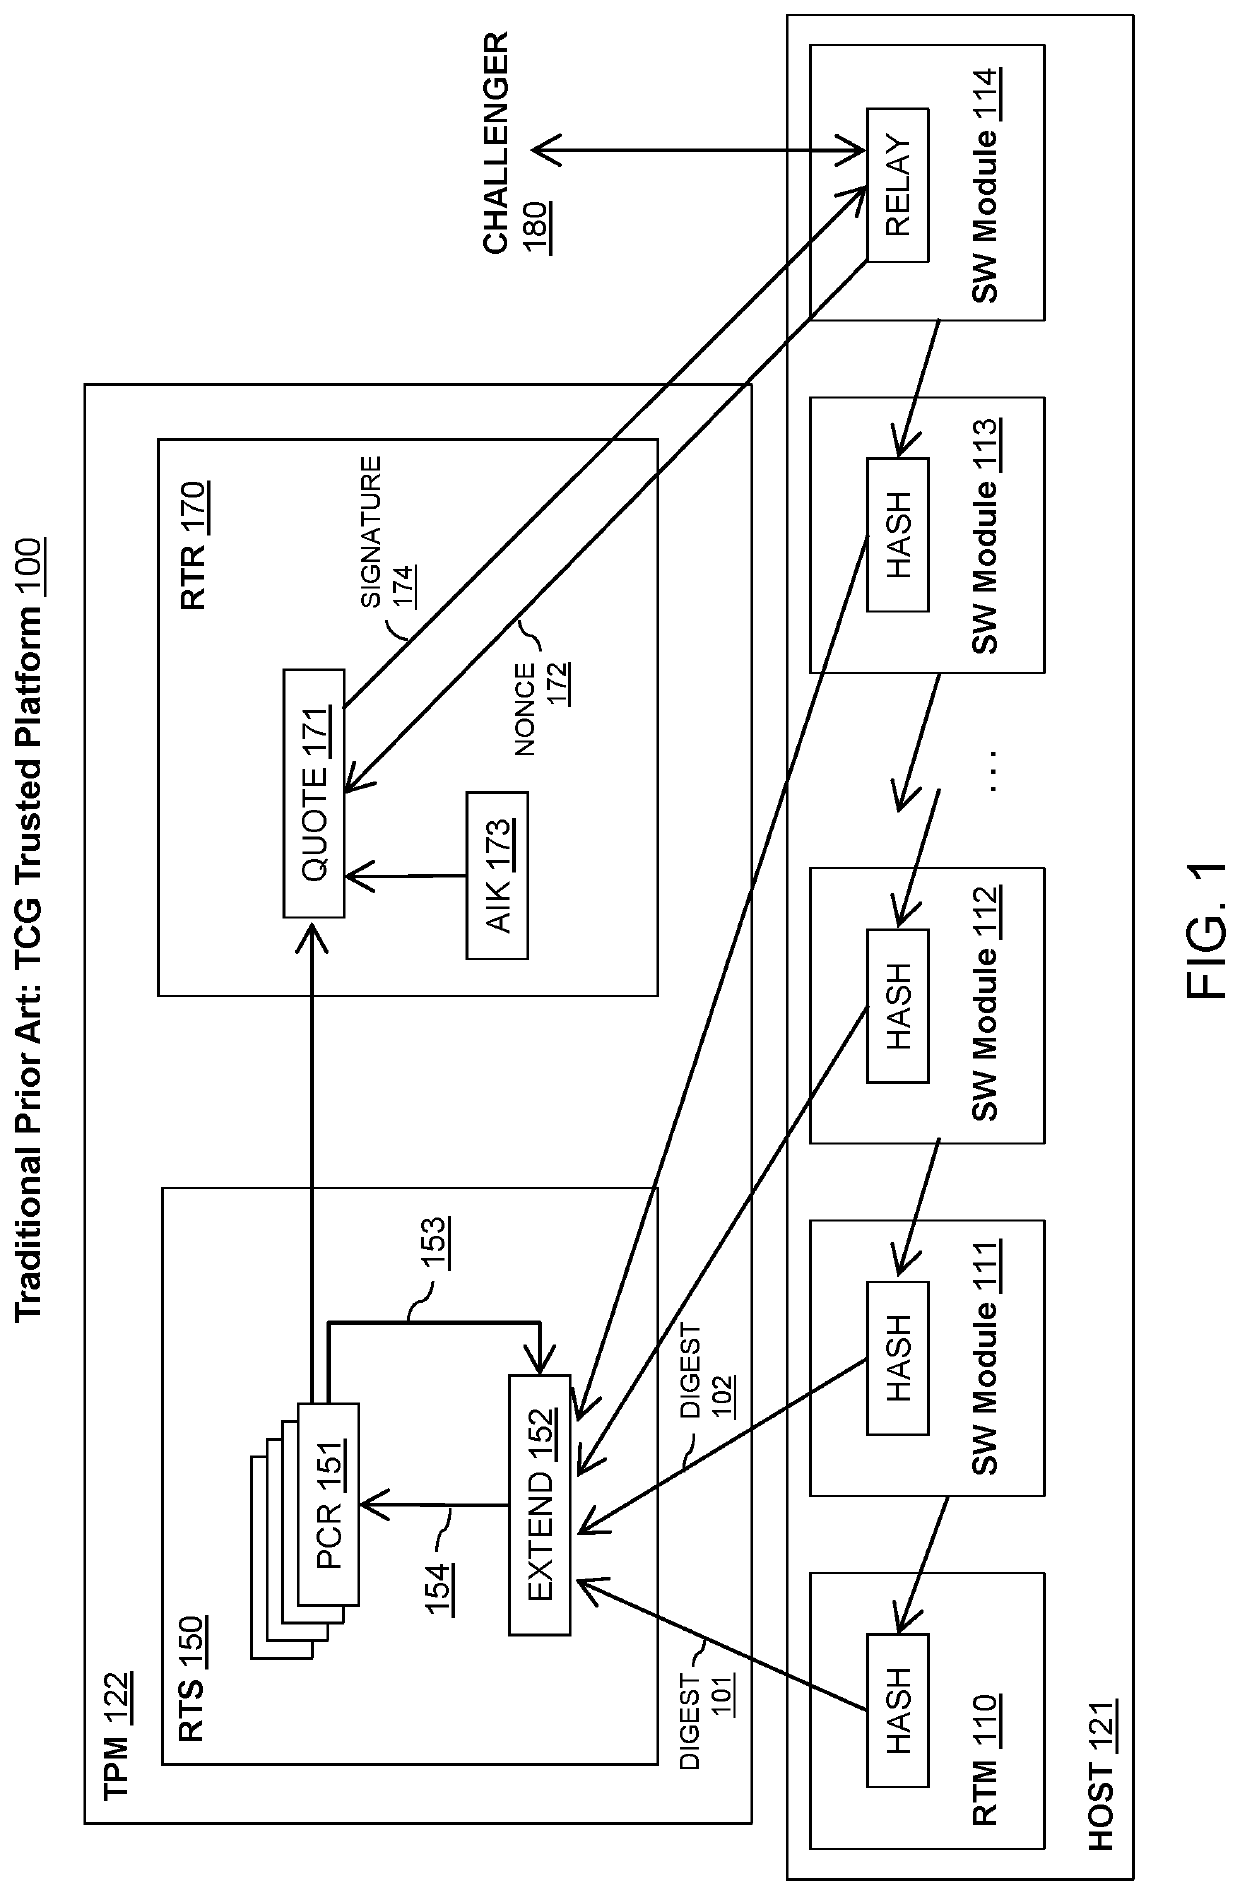 System and Method for Measuring and Reporting IoT Boot Integrity